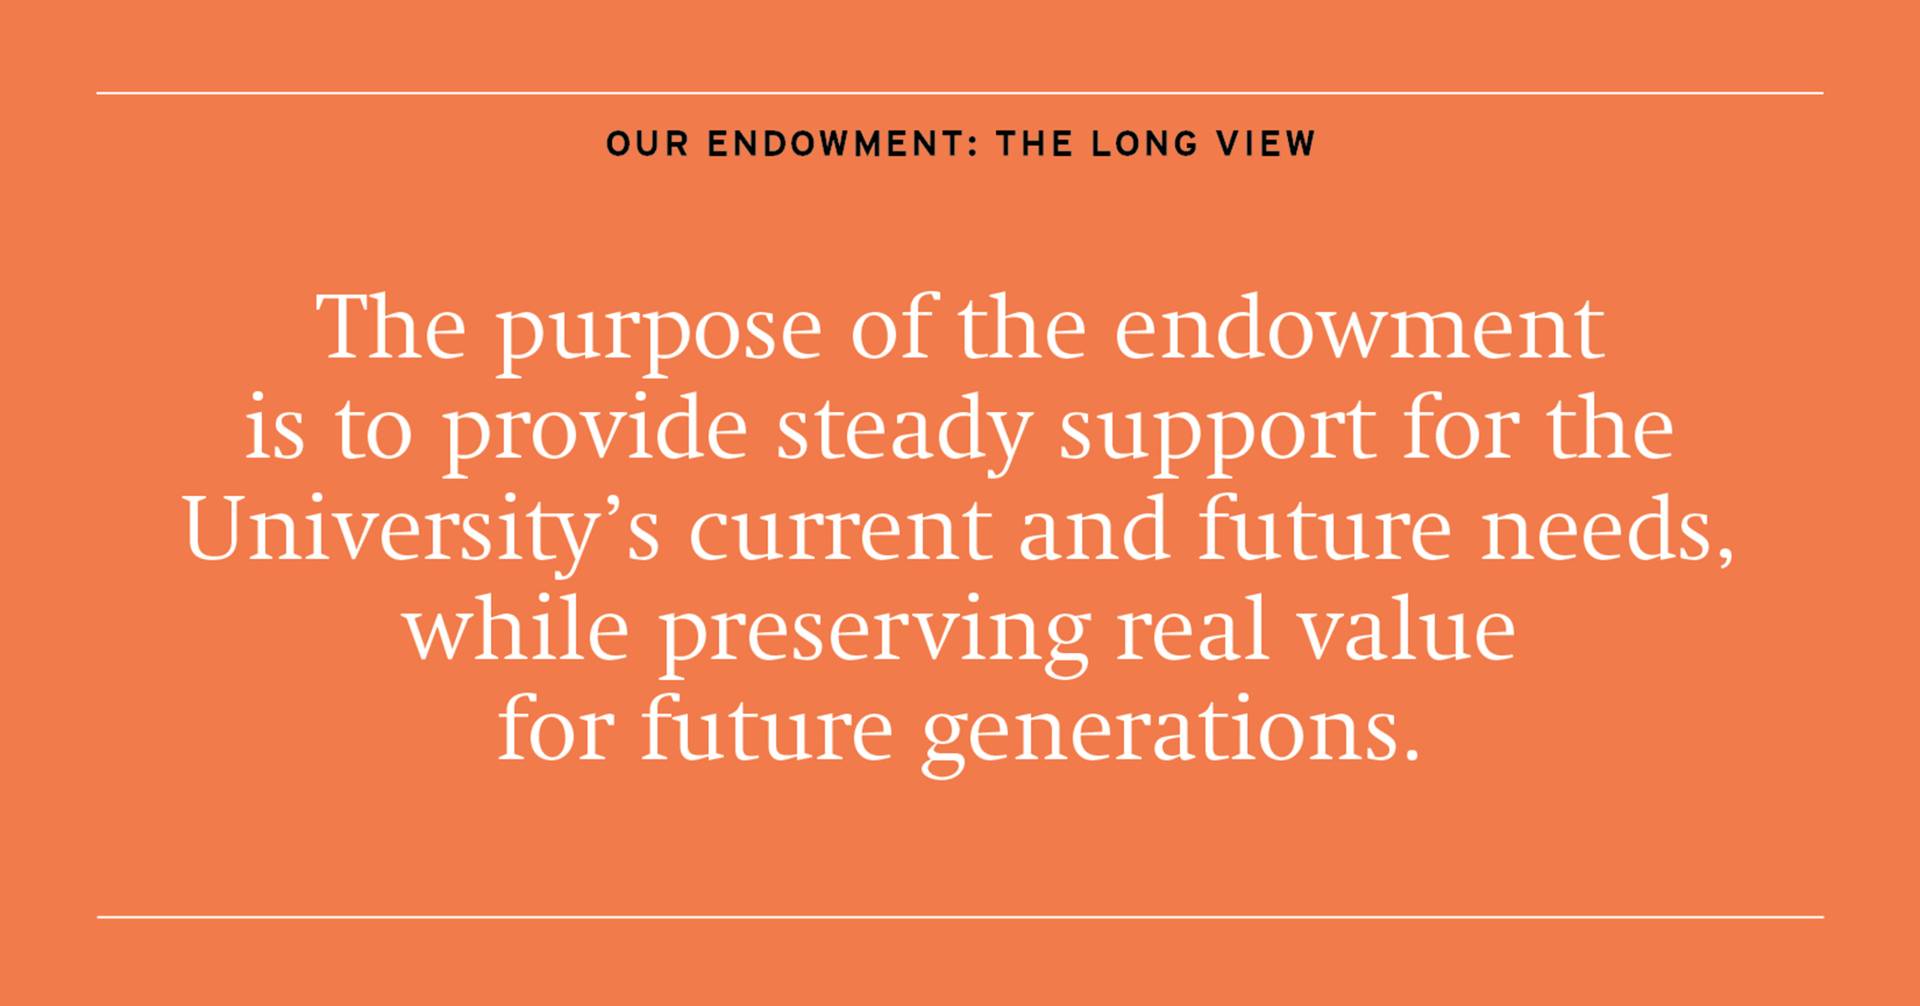 The purpose of the endowment is to provide steady support for the University's current and future needs, while preserving real value for future generations.